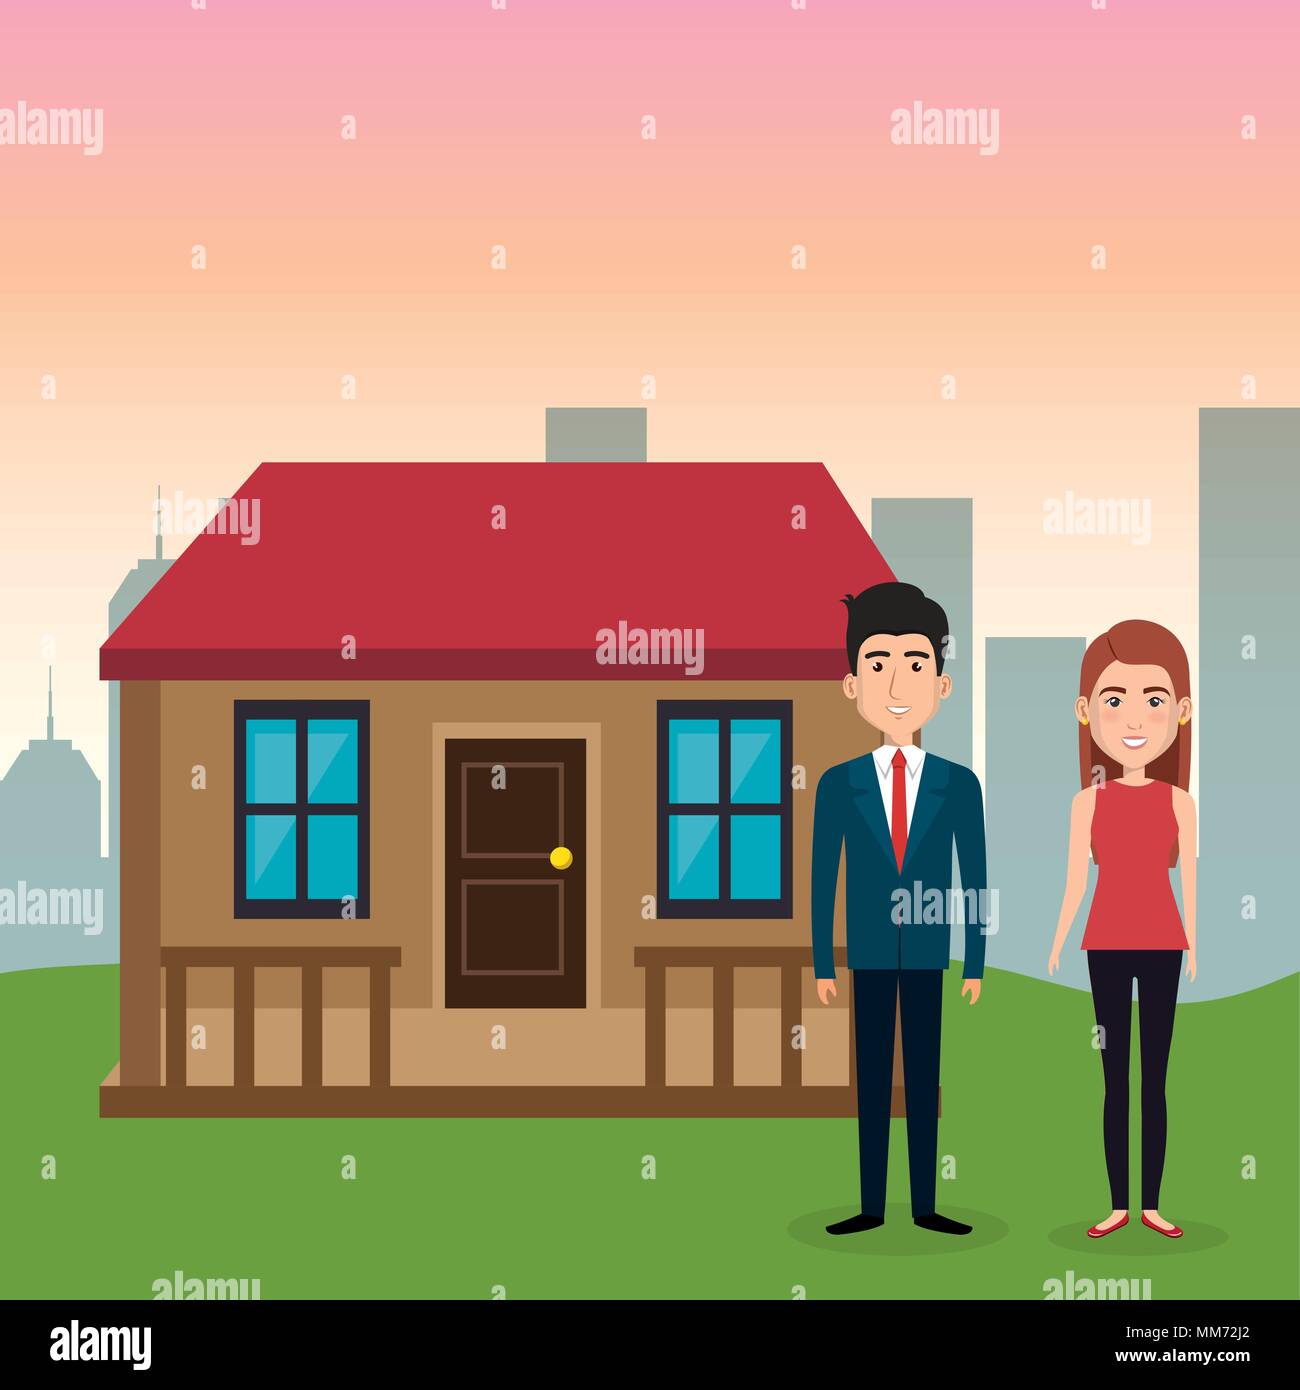 young couple in the landscape avatars characters Stock Vector